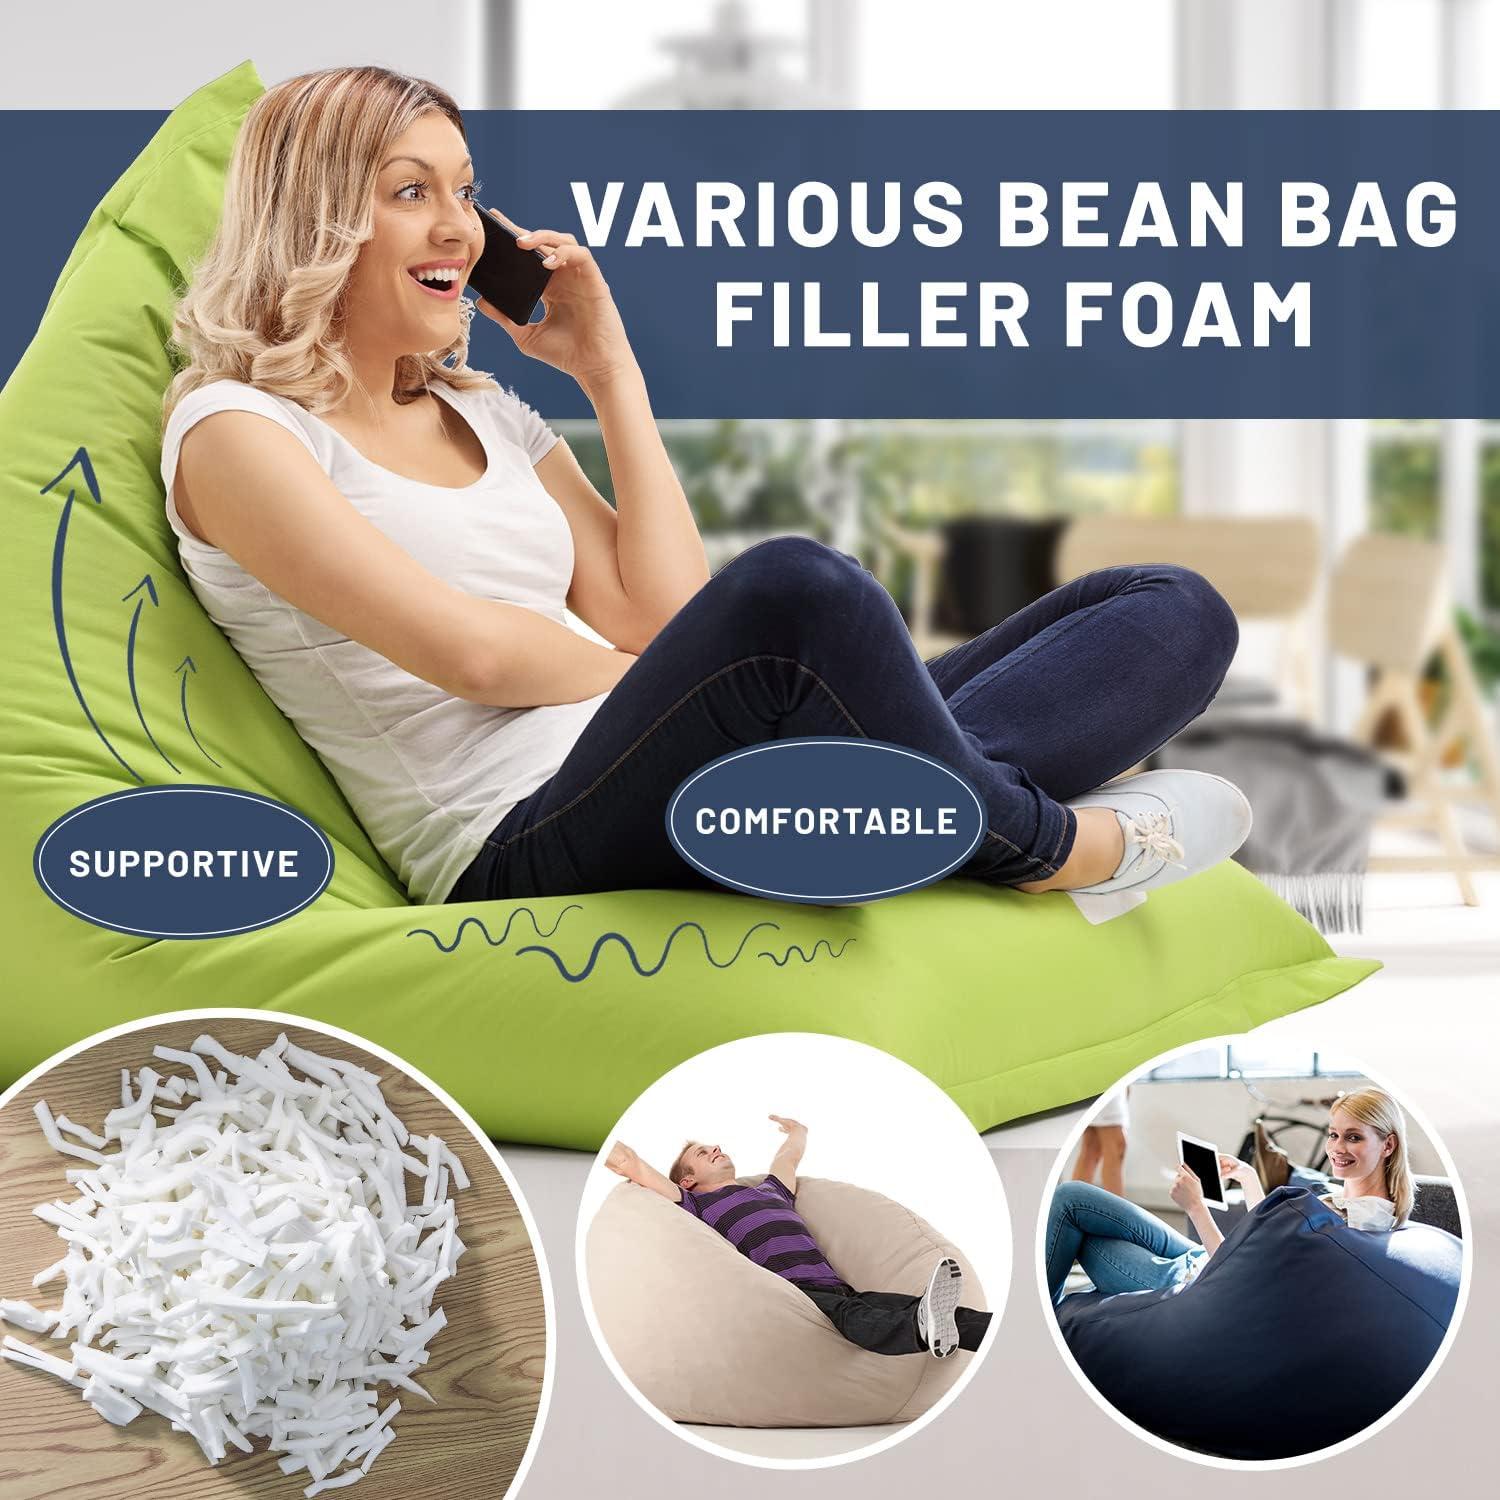 1/2Kg Shredded Memory Foam Filling Breathable Bean Bag Filler Soft Pillow  Stuffing Foam for Couch Cushion Dog Bed Chair - AliExpress